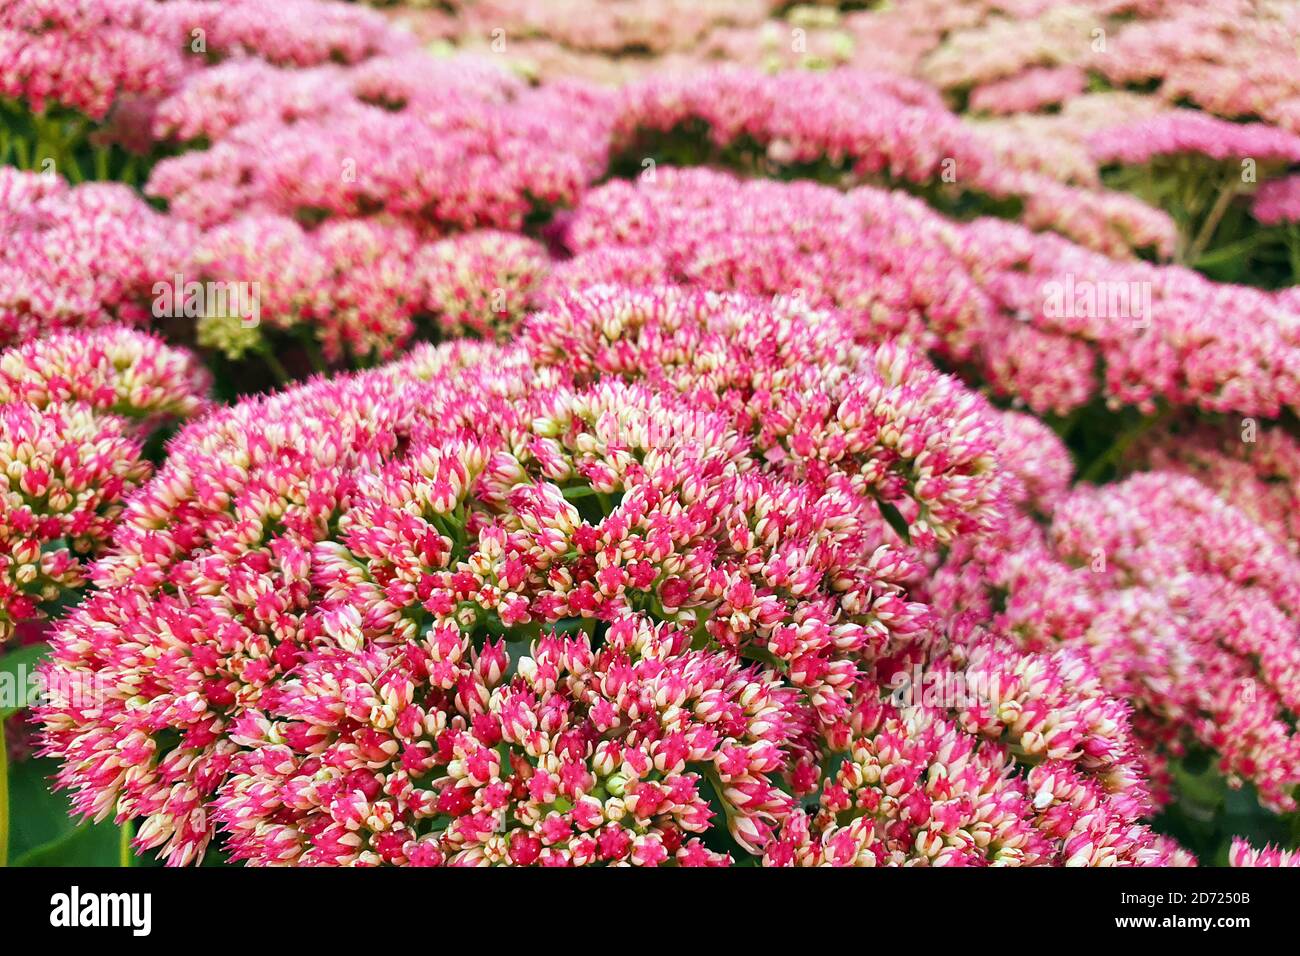 Hylotelephium or Sedum Herbstfreude or Stonecrop Autumn Joy. Red flowers a lot. Close up. Stock Photo